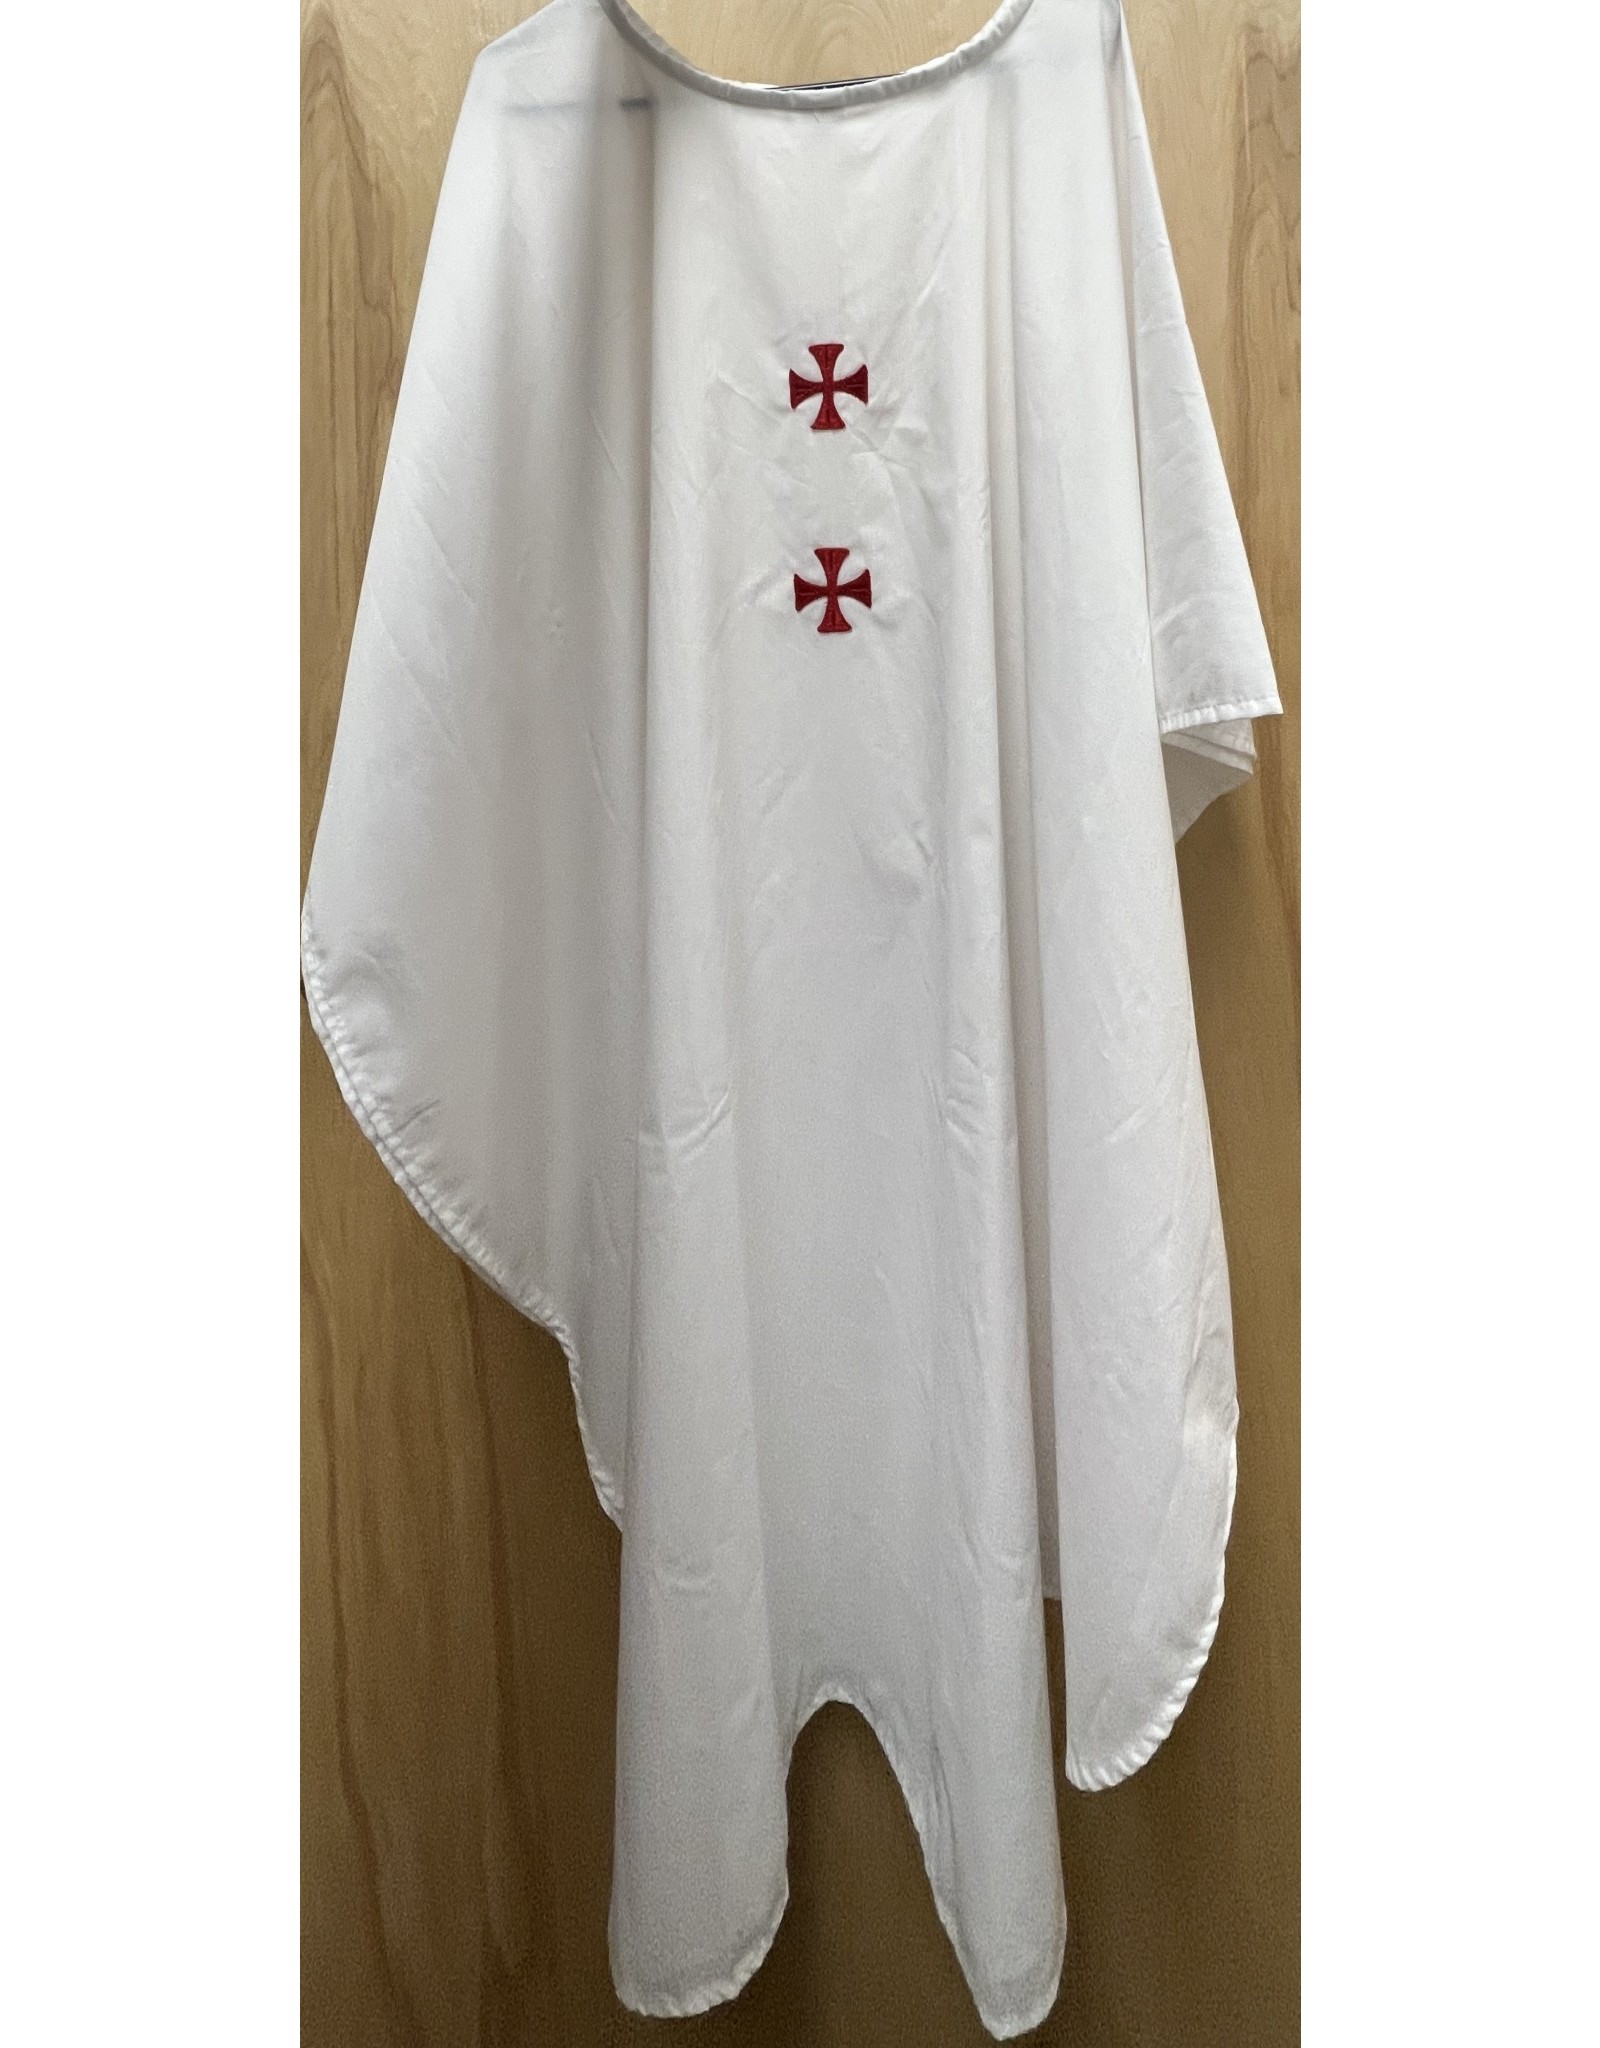 Harbro Chasuble - White with Red Cross (no inner stole)